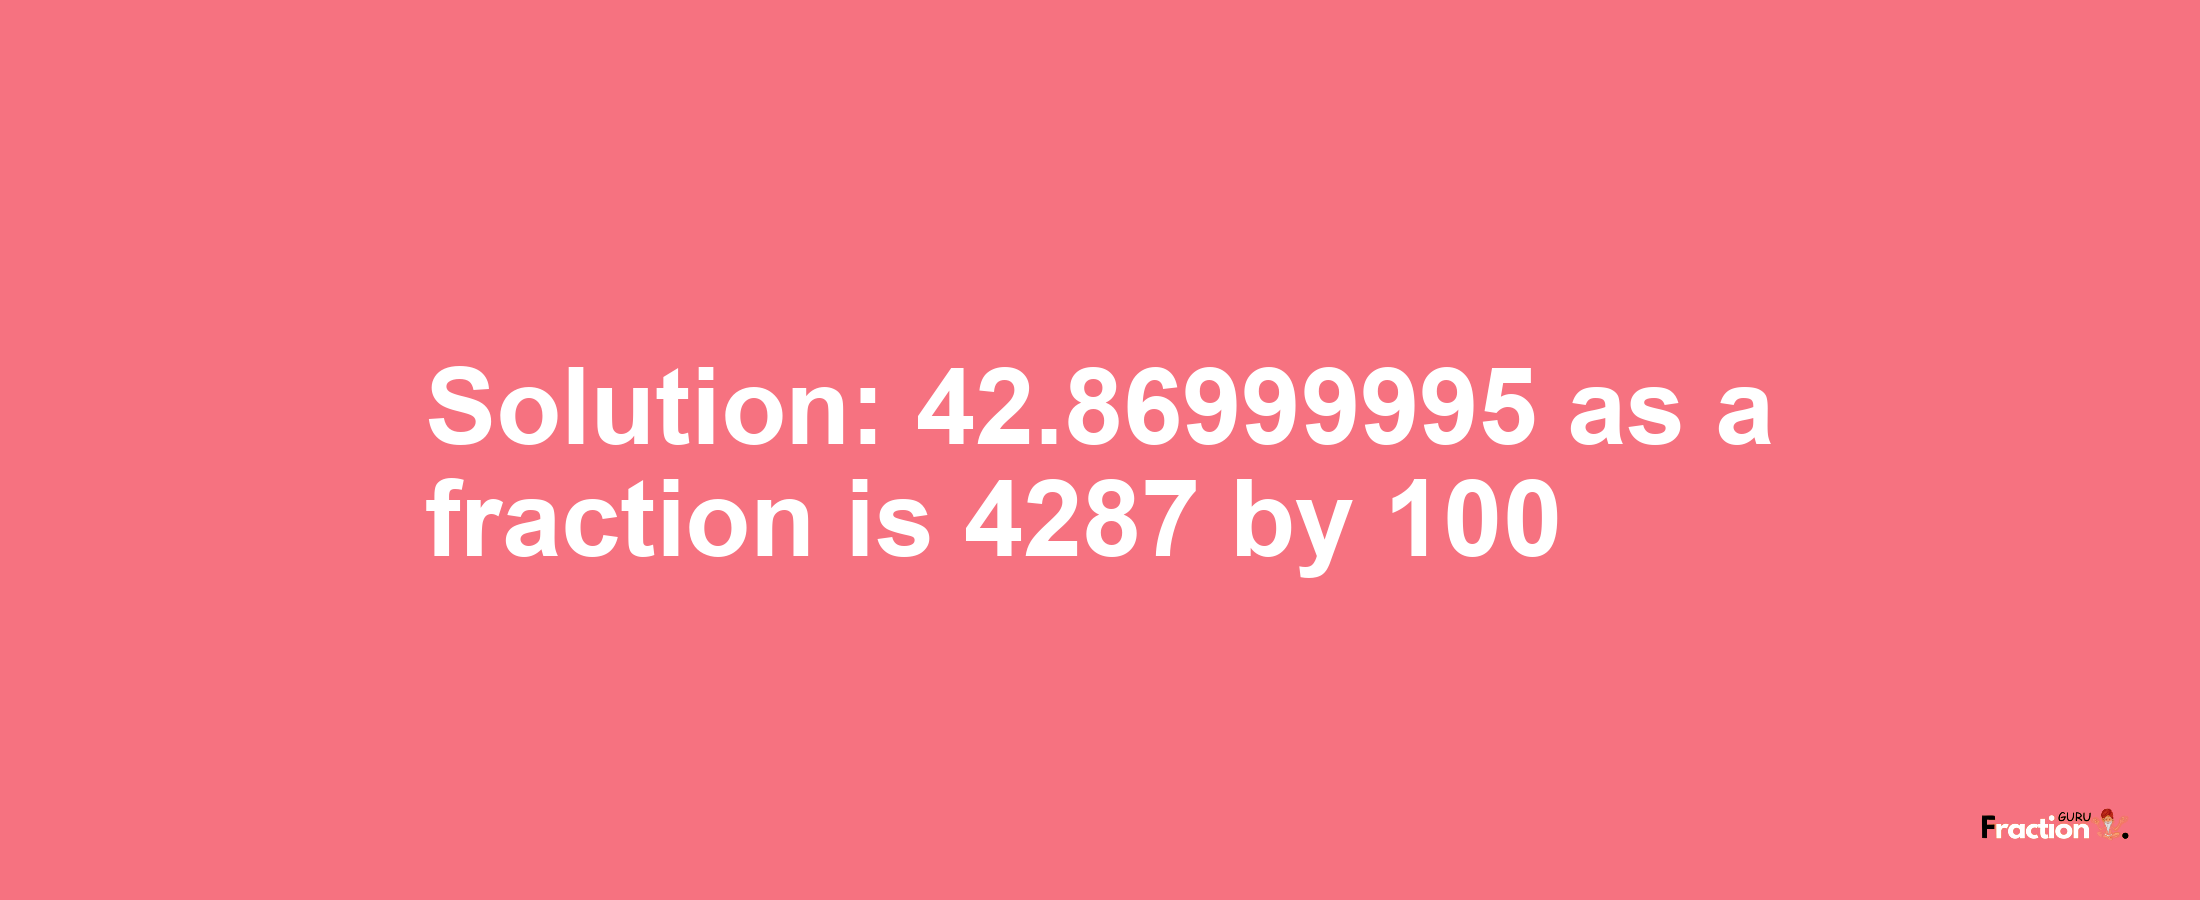 Solution:42.86999995 as a fraction is 4287/100